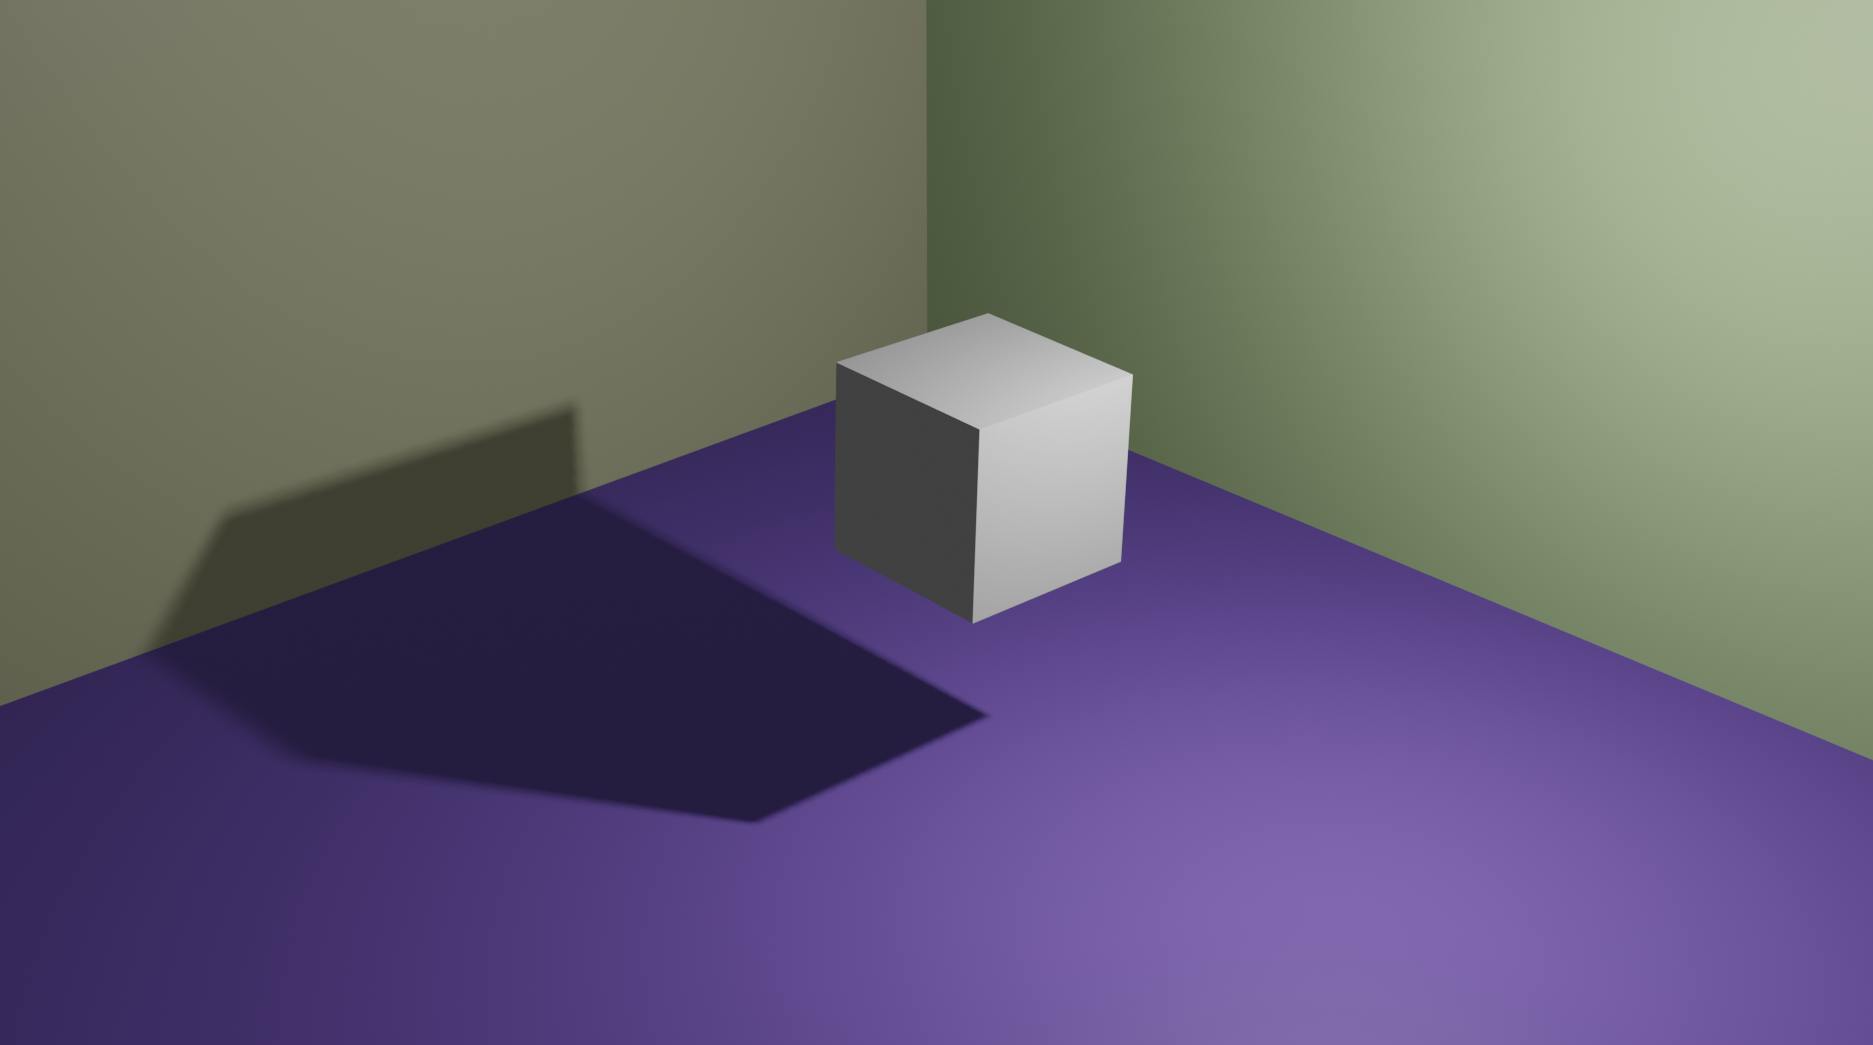 Simple 3D rendered scene with a purple floor, yellow walls and a cube floating in the middle